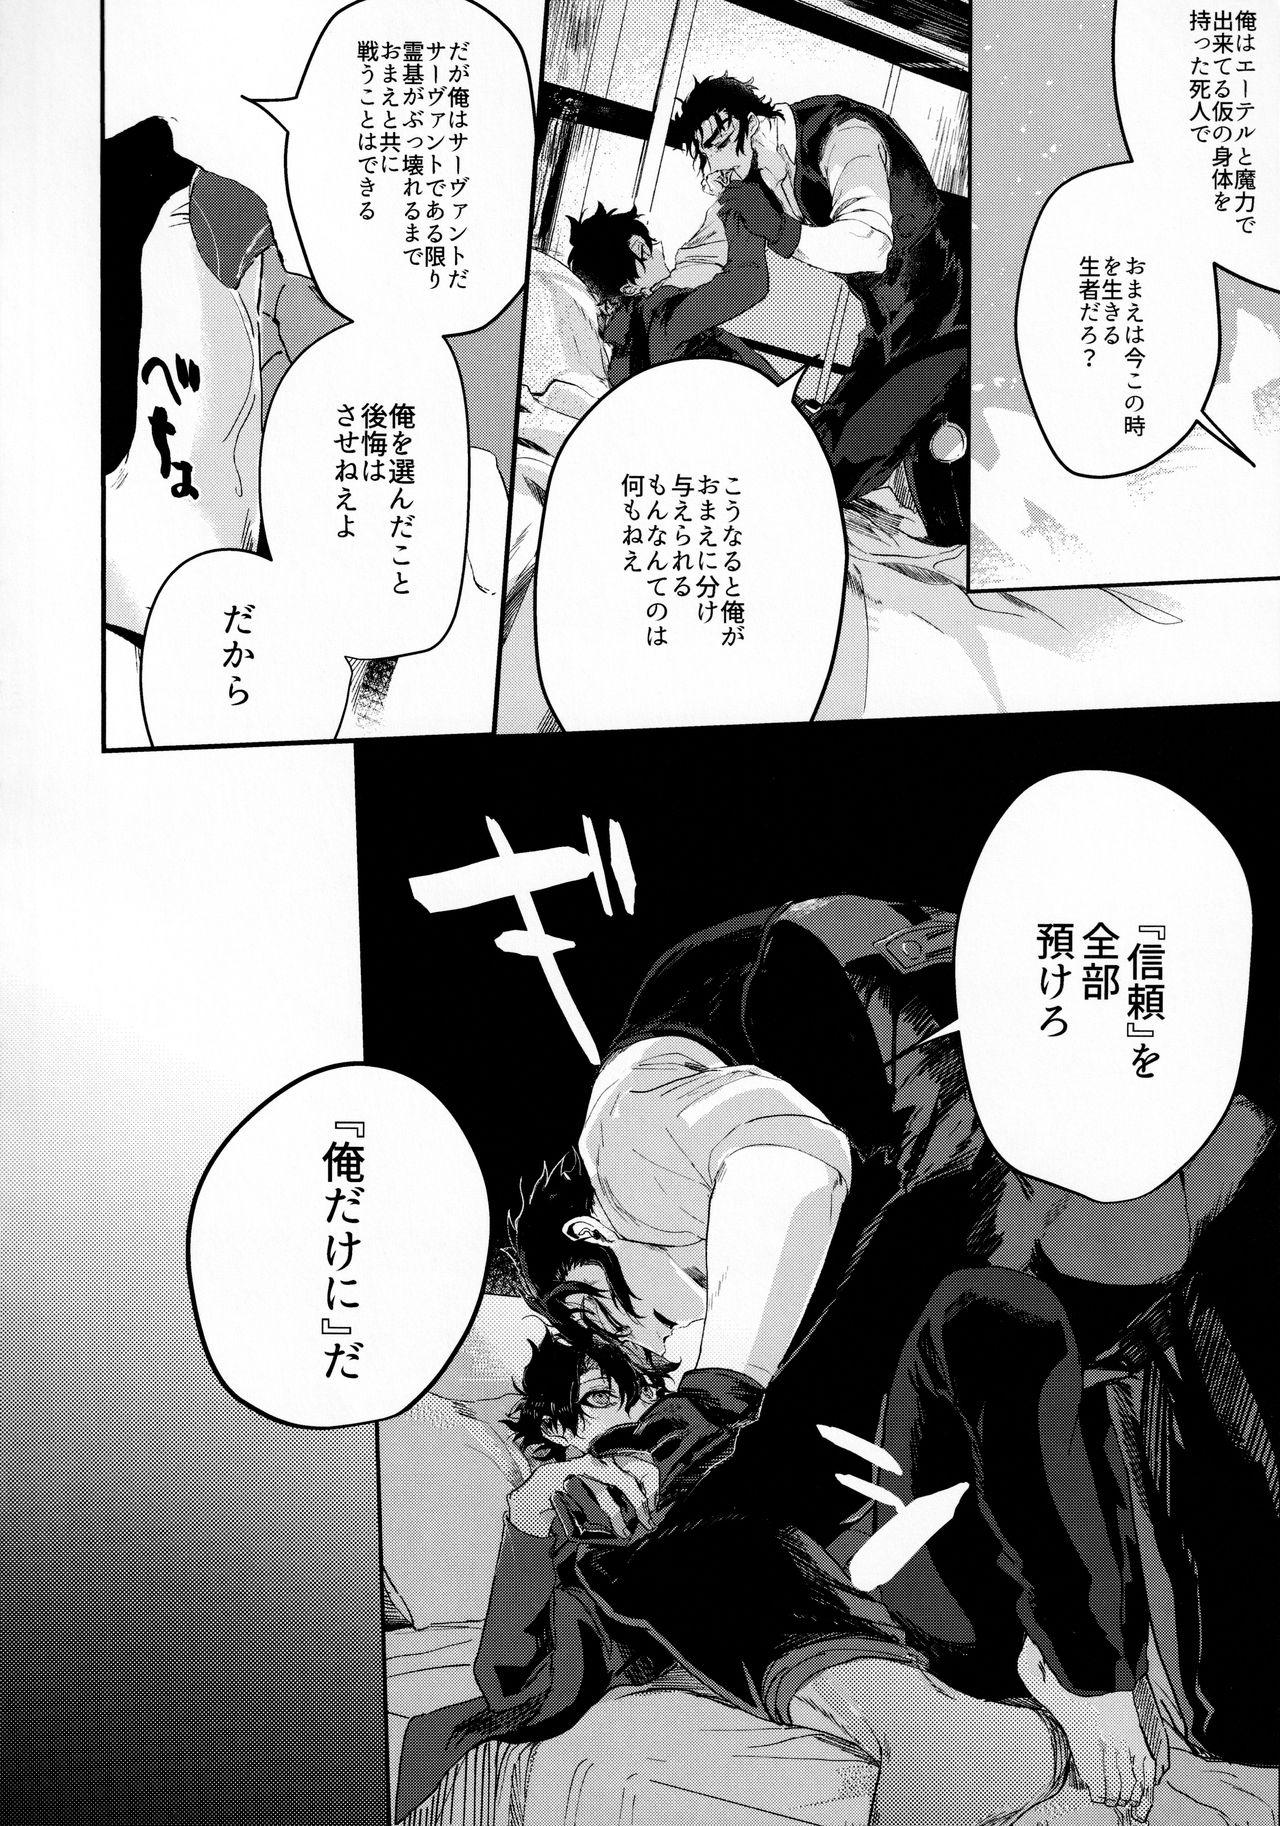 Perfect Teen 耽溺と熱 - Fate grand order Hardcore Rough Sex - Page 11